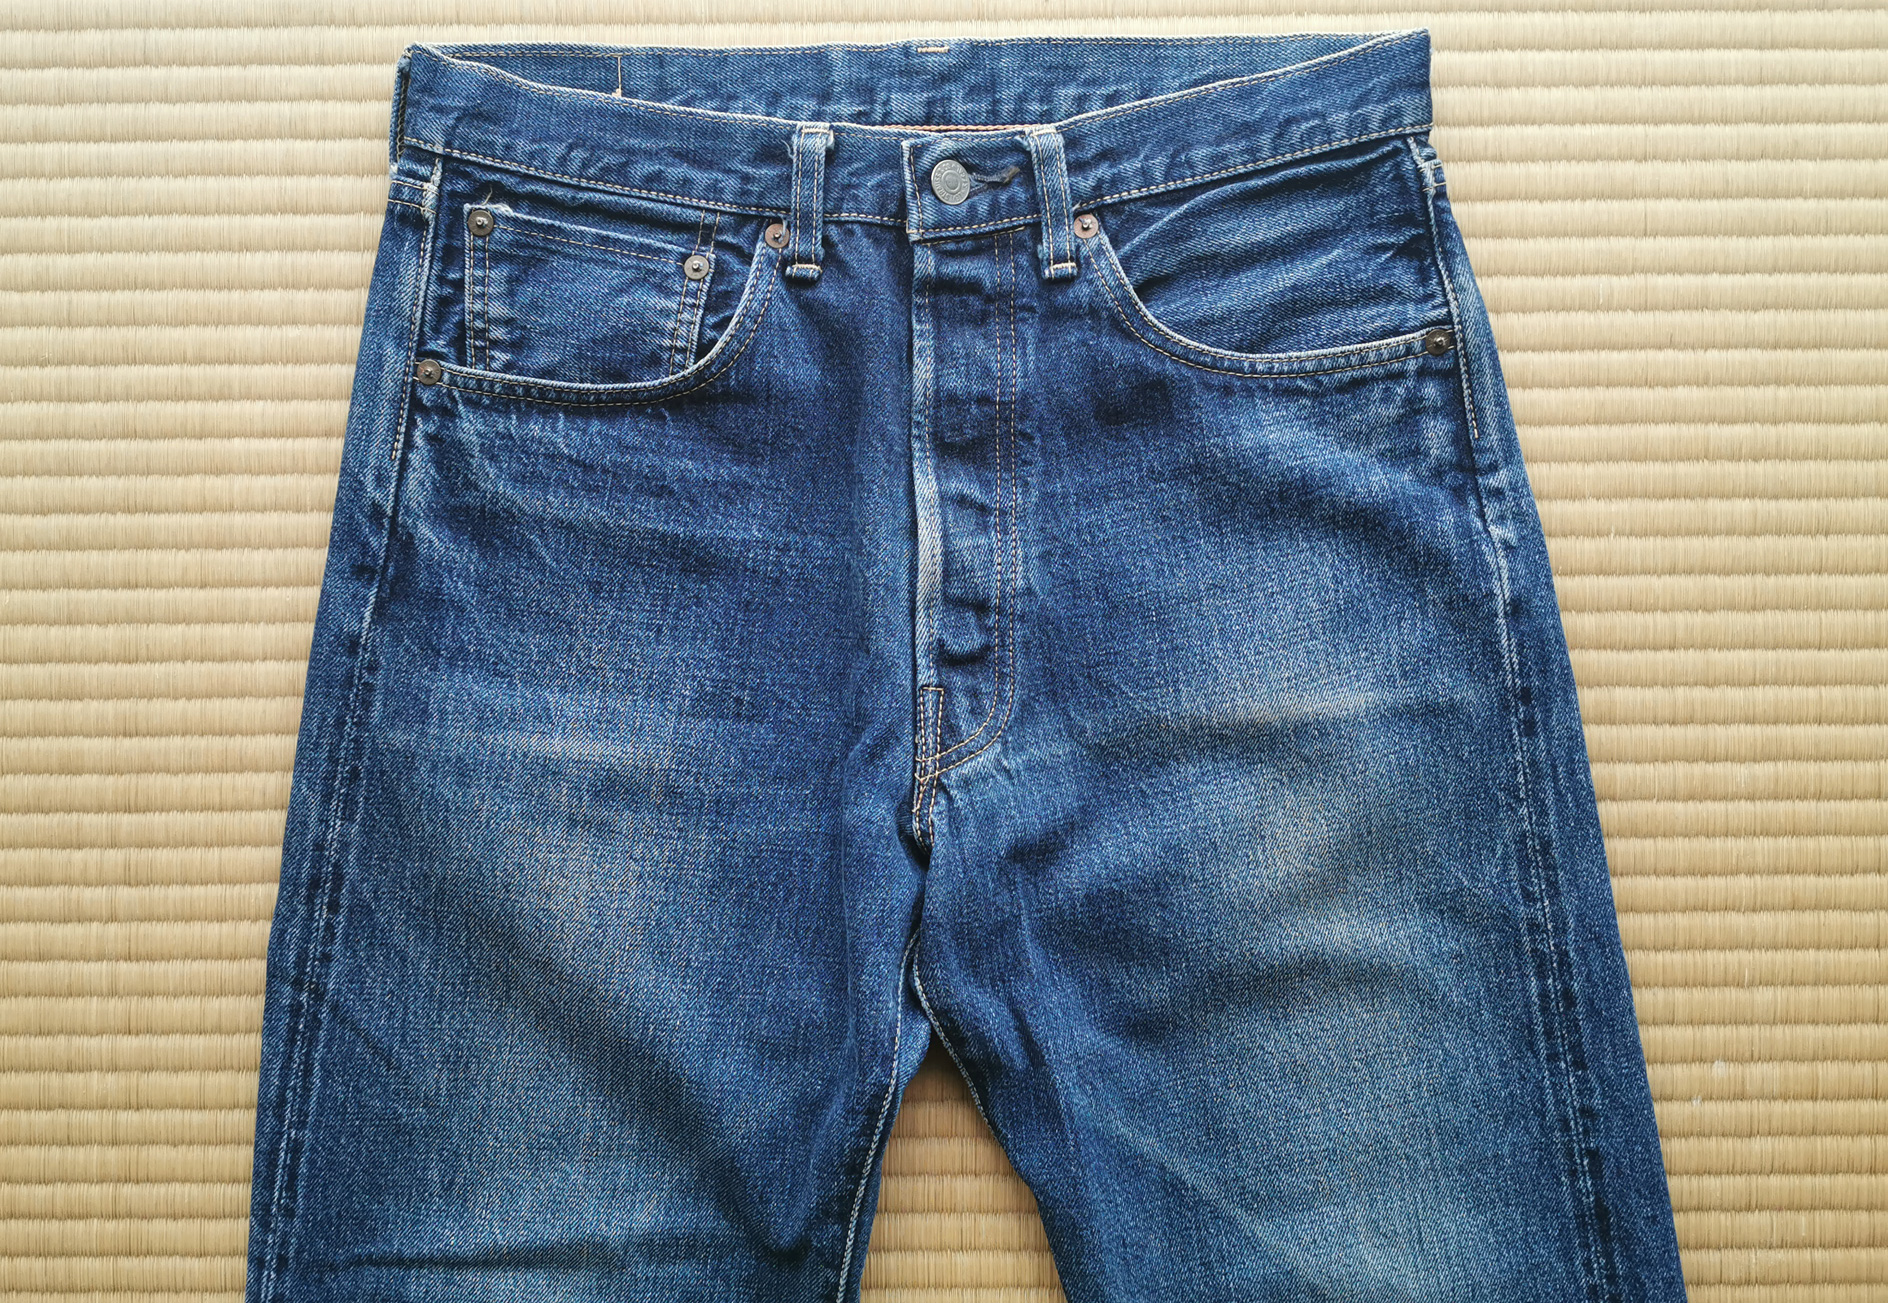 LVC (Levi's Vintage Clothing) 55501 Made in Japan Fading Report